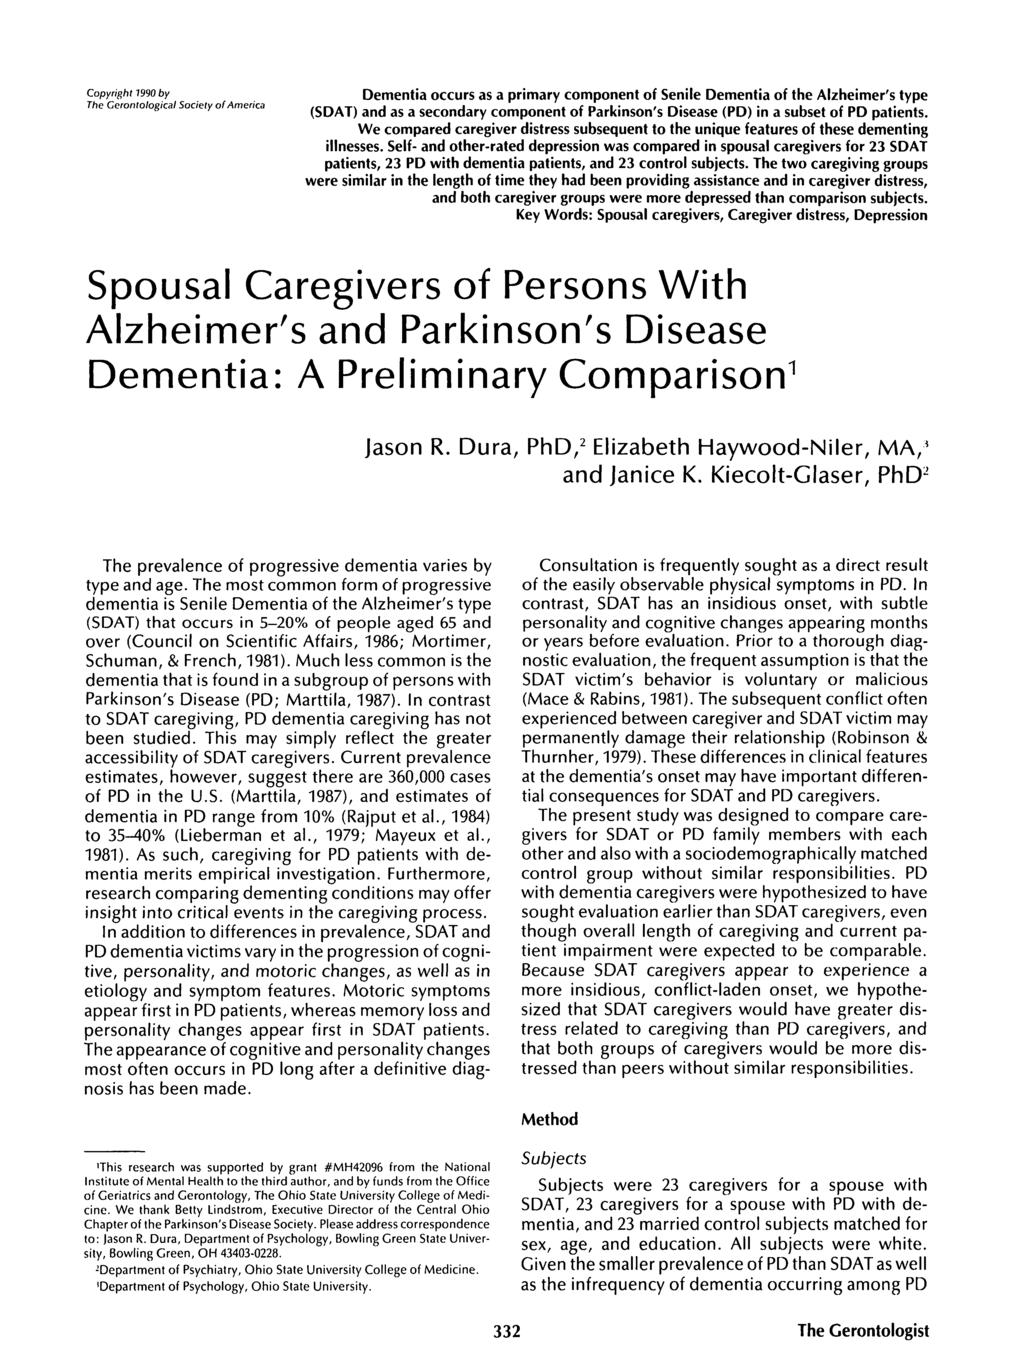 Copyright 7990 by The Cerontological Society of America Dementia occurs as a primary component of Senile Dementia of the Alzheimer's type (SDAT) and as a secondary component of Parkinson's Disease